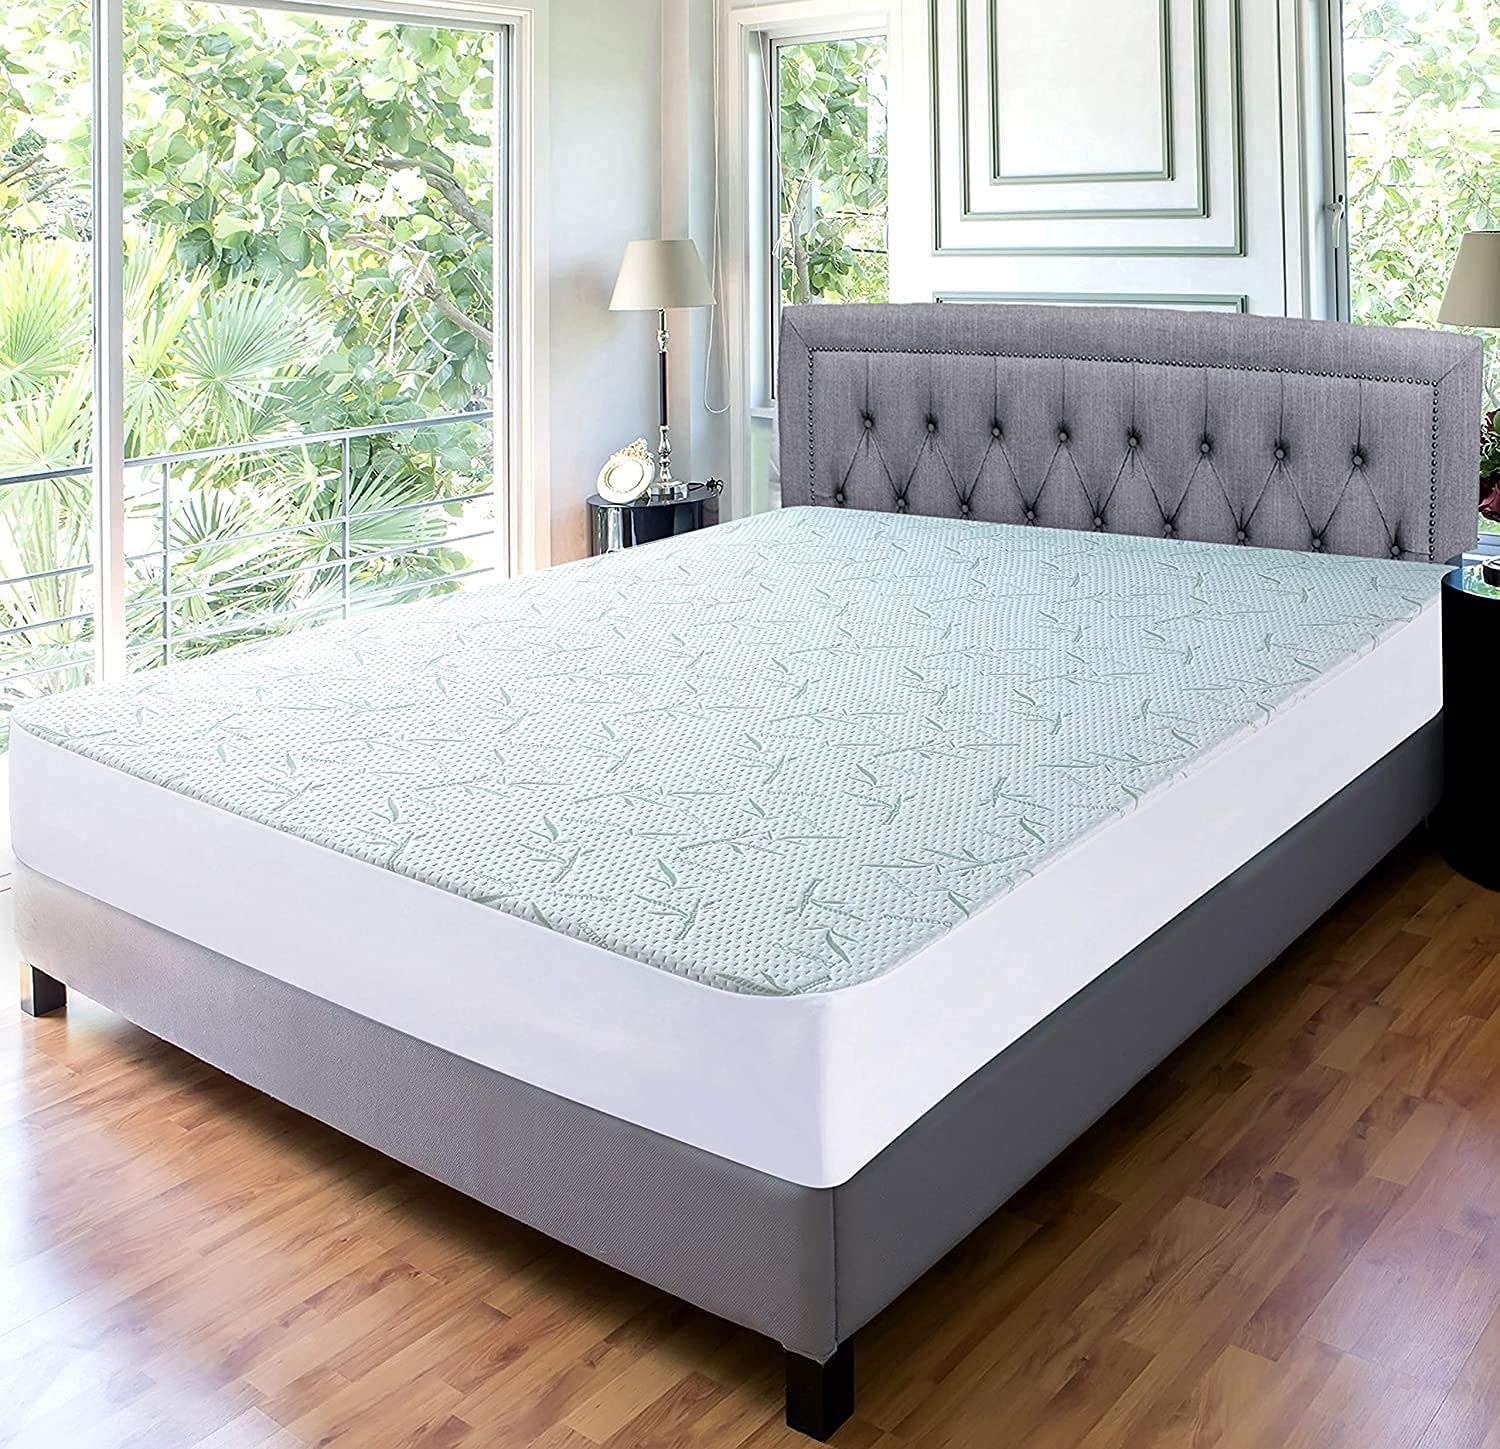 the mattress protector on a mattress on a bed